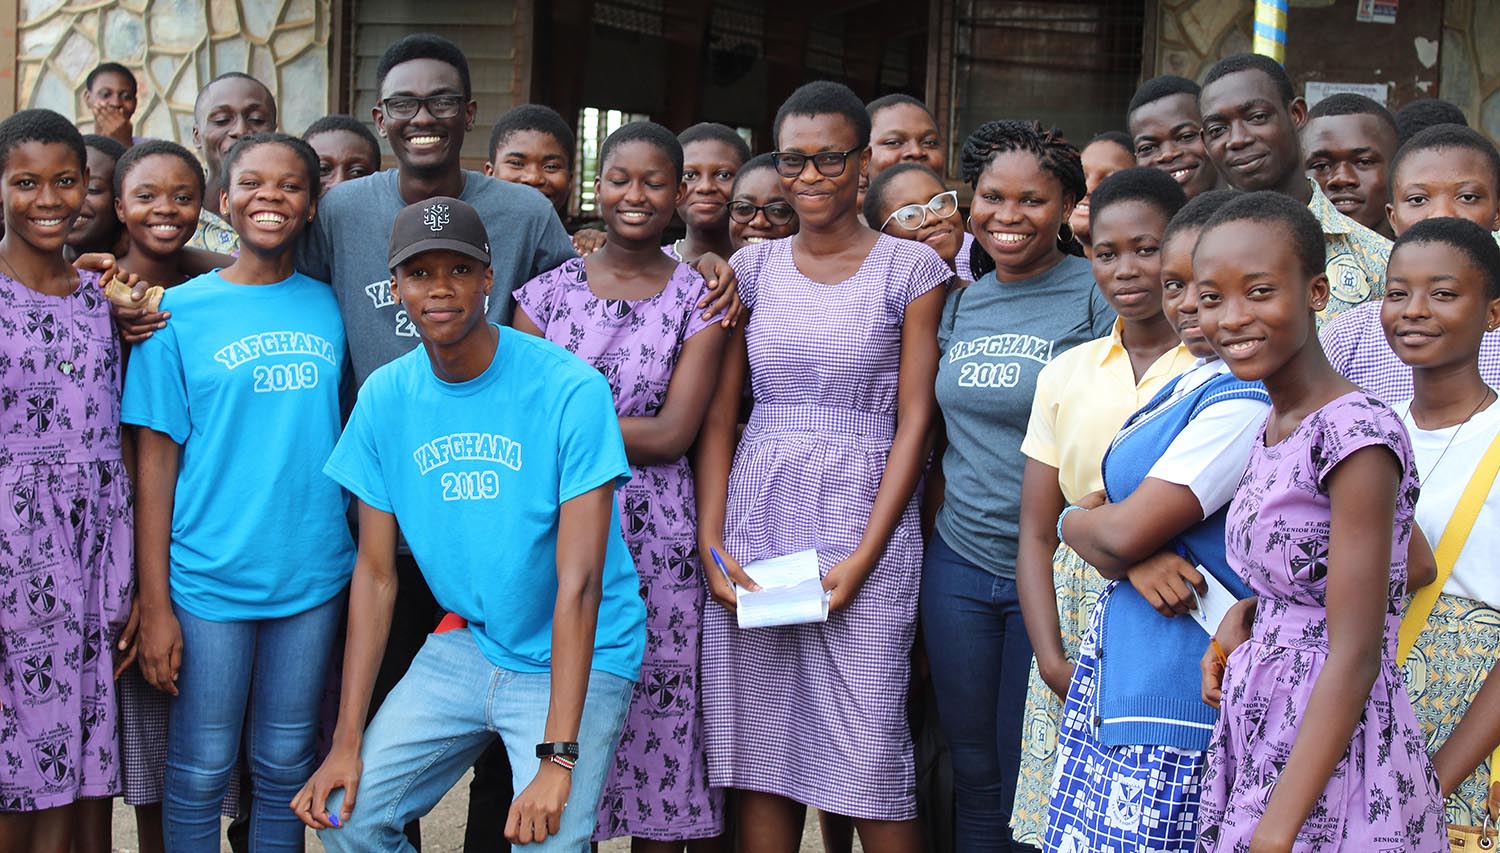 The Young Achievers Foundation (YAF) Ghana, spearheaded by Ferdinand Quayson '20 (pictured in the black shirt), is a recipient of a 2019 Davis Projects for Peace Award. YAF Ghana exposes disadvantaged students in Northern Ghana to available scholarship opportunities and provides them with free resources needed to be successful applicants.